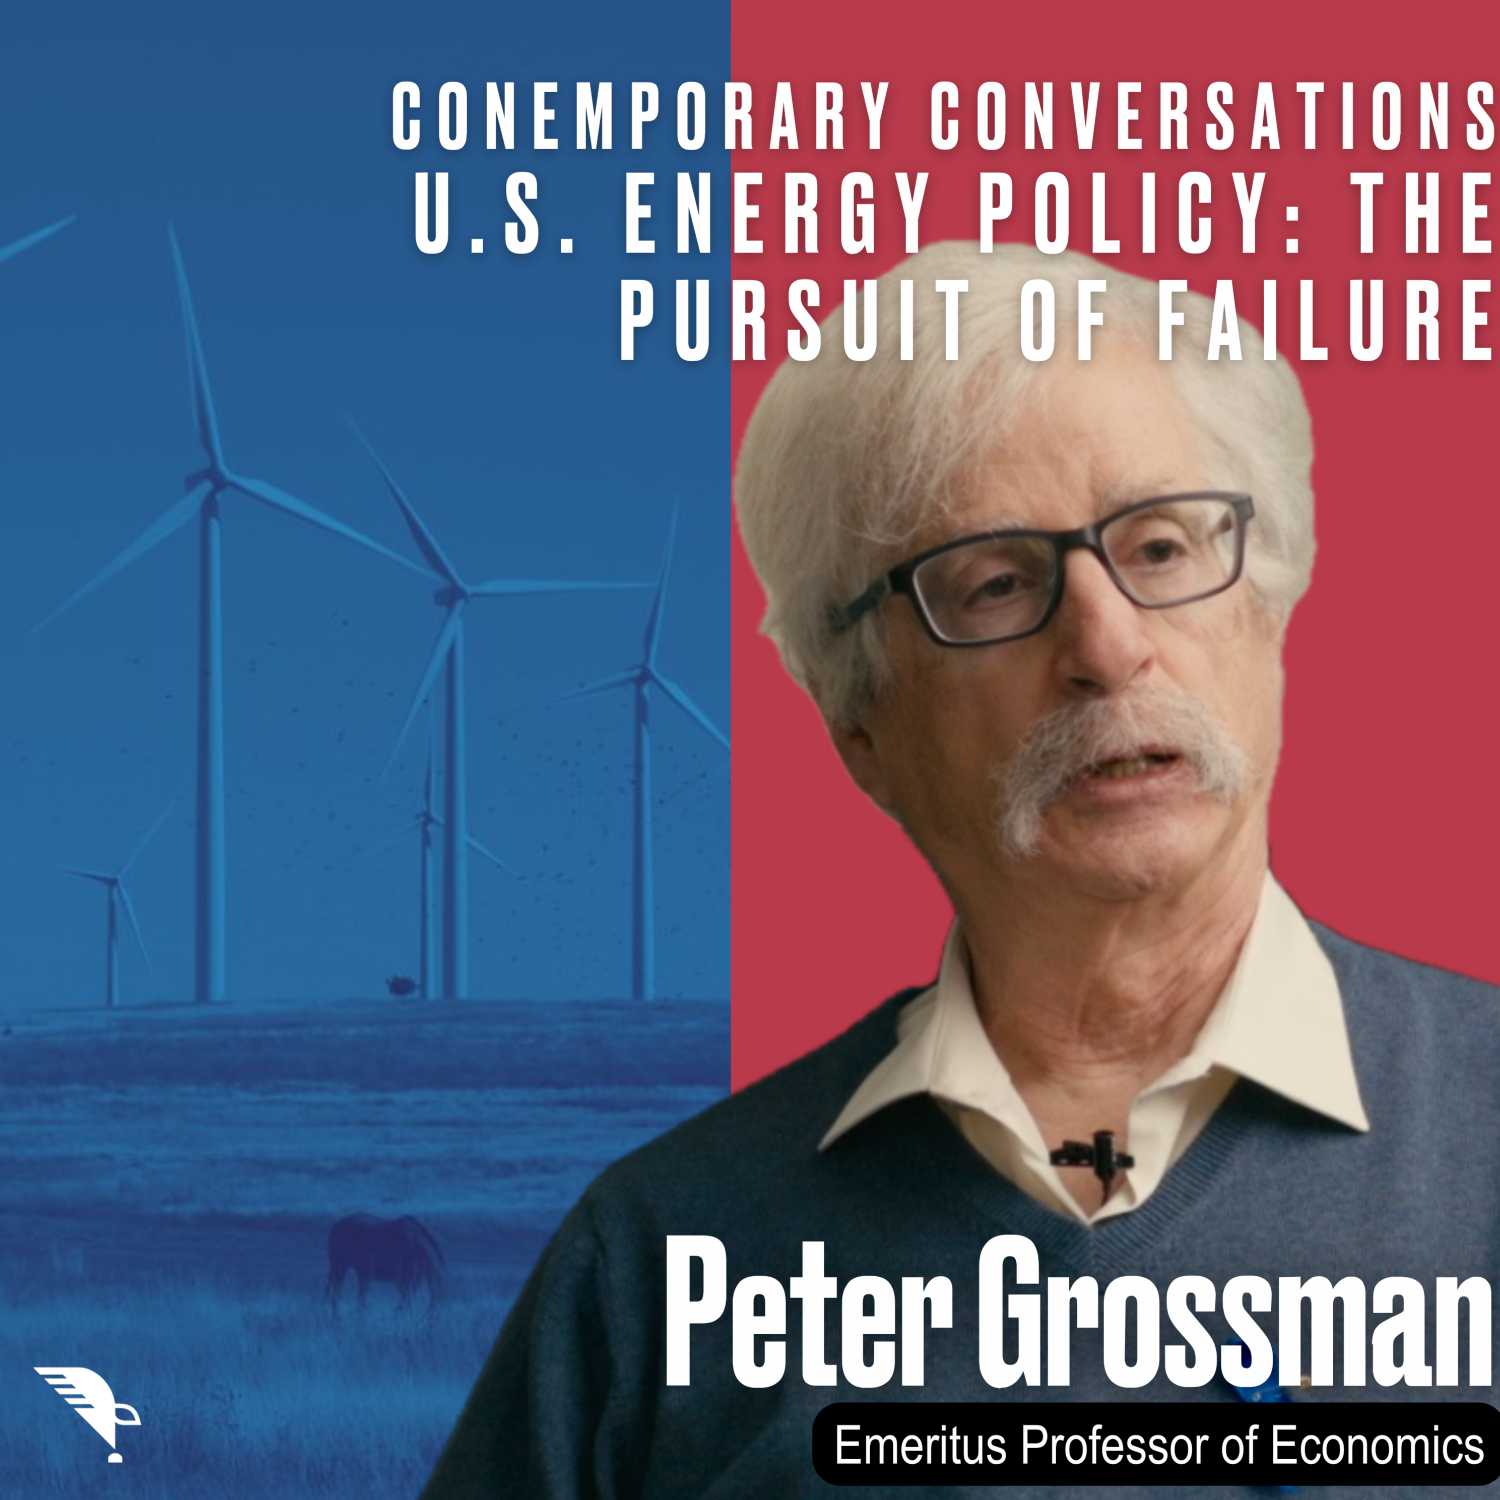 U.S. Energy Policy - The Pursuit of Failure